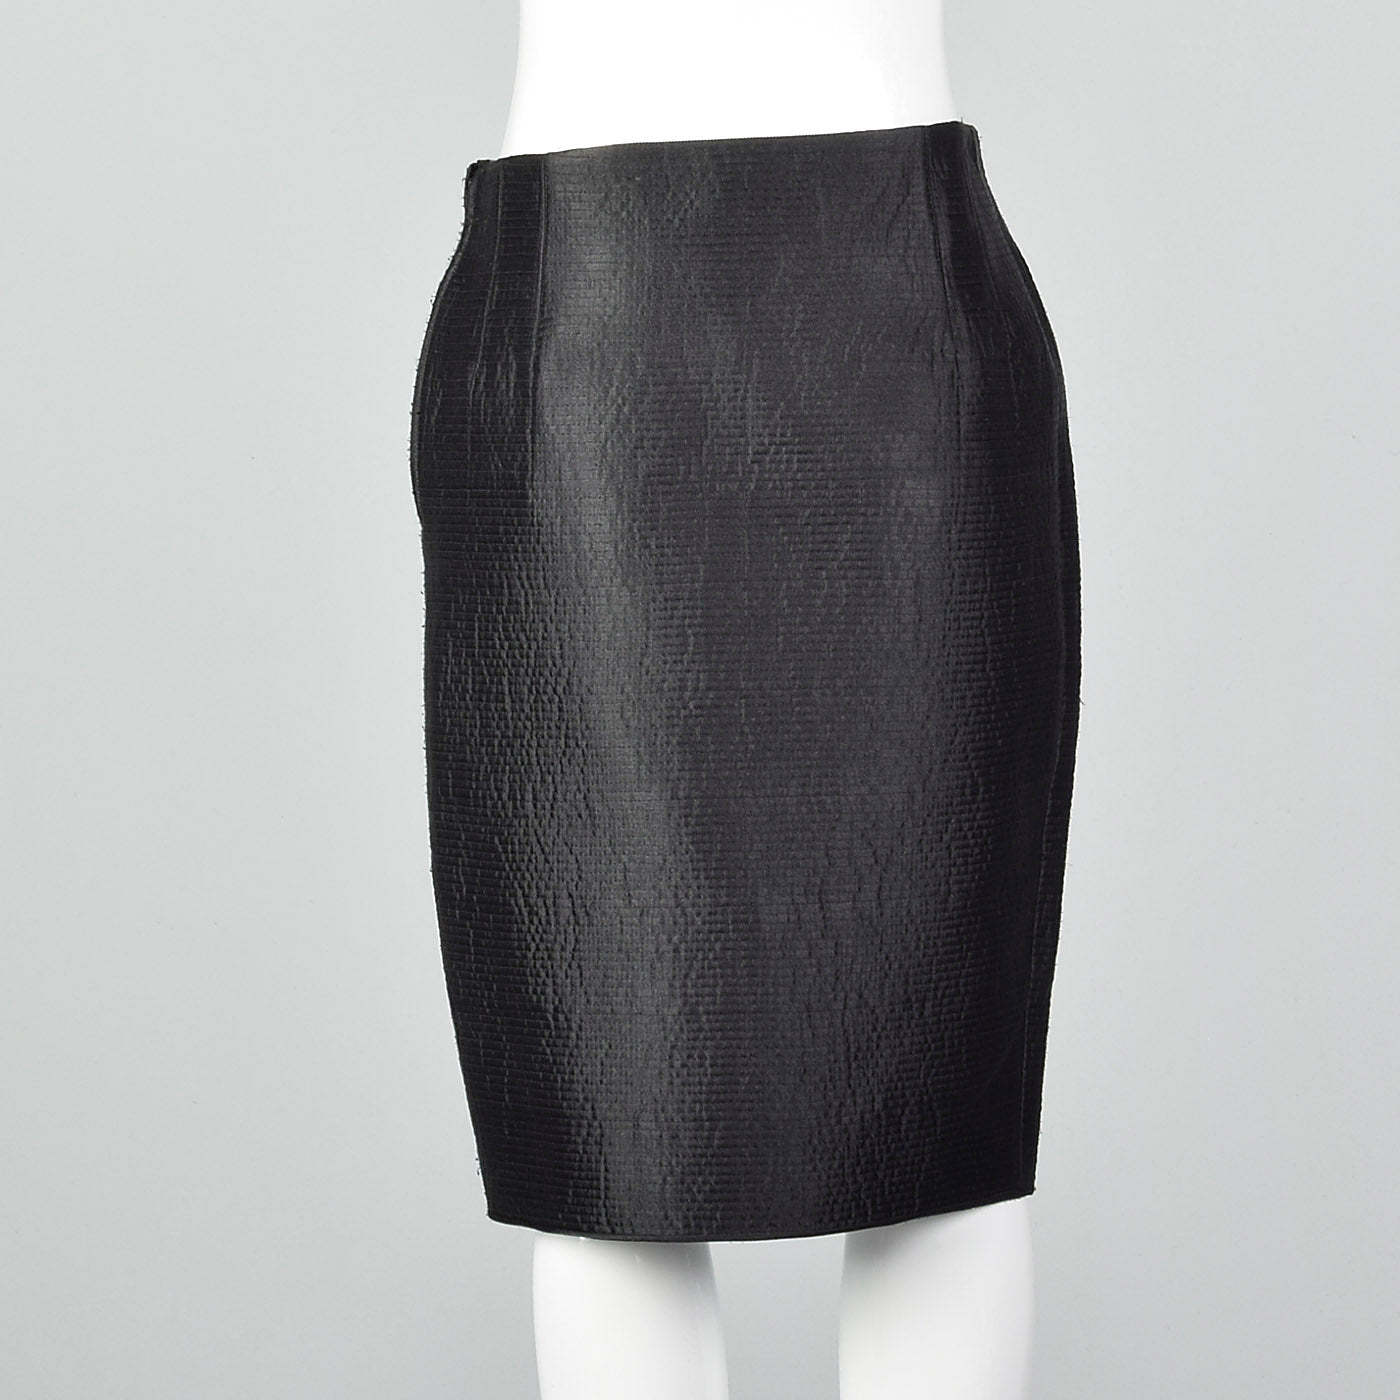 1990s Mary McFadden Couture Black Pencil Skirt With Horizontal Stitching